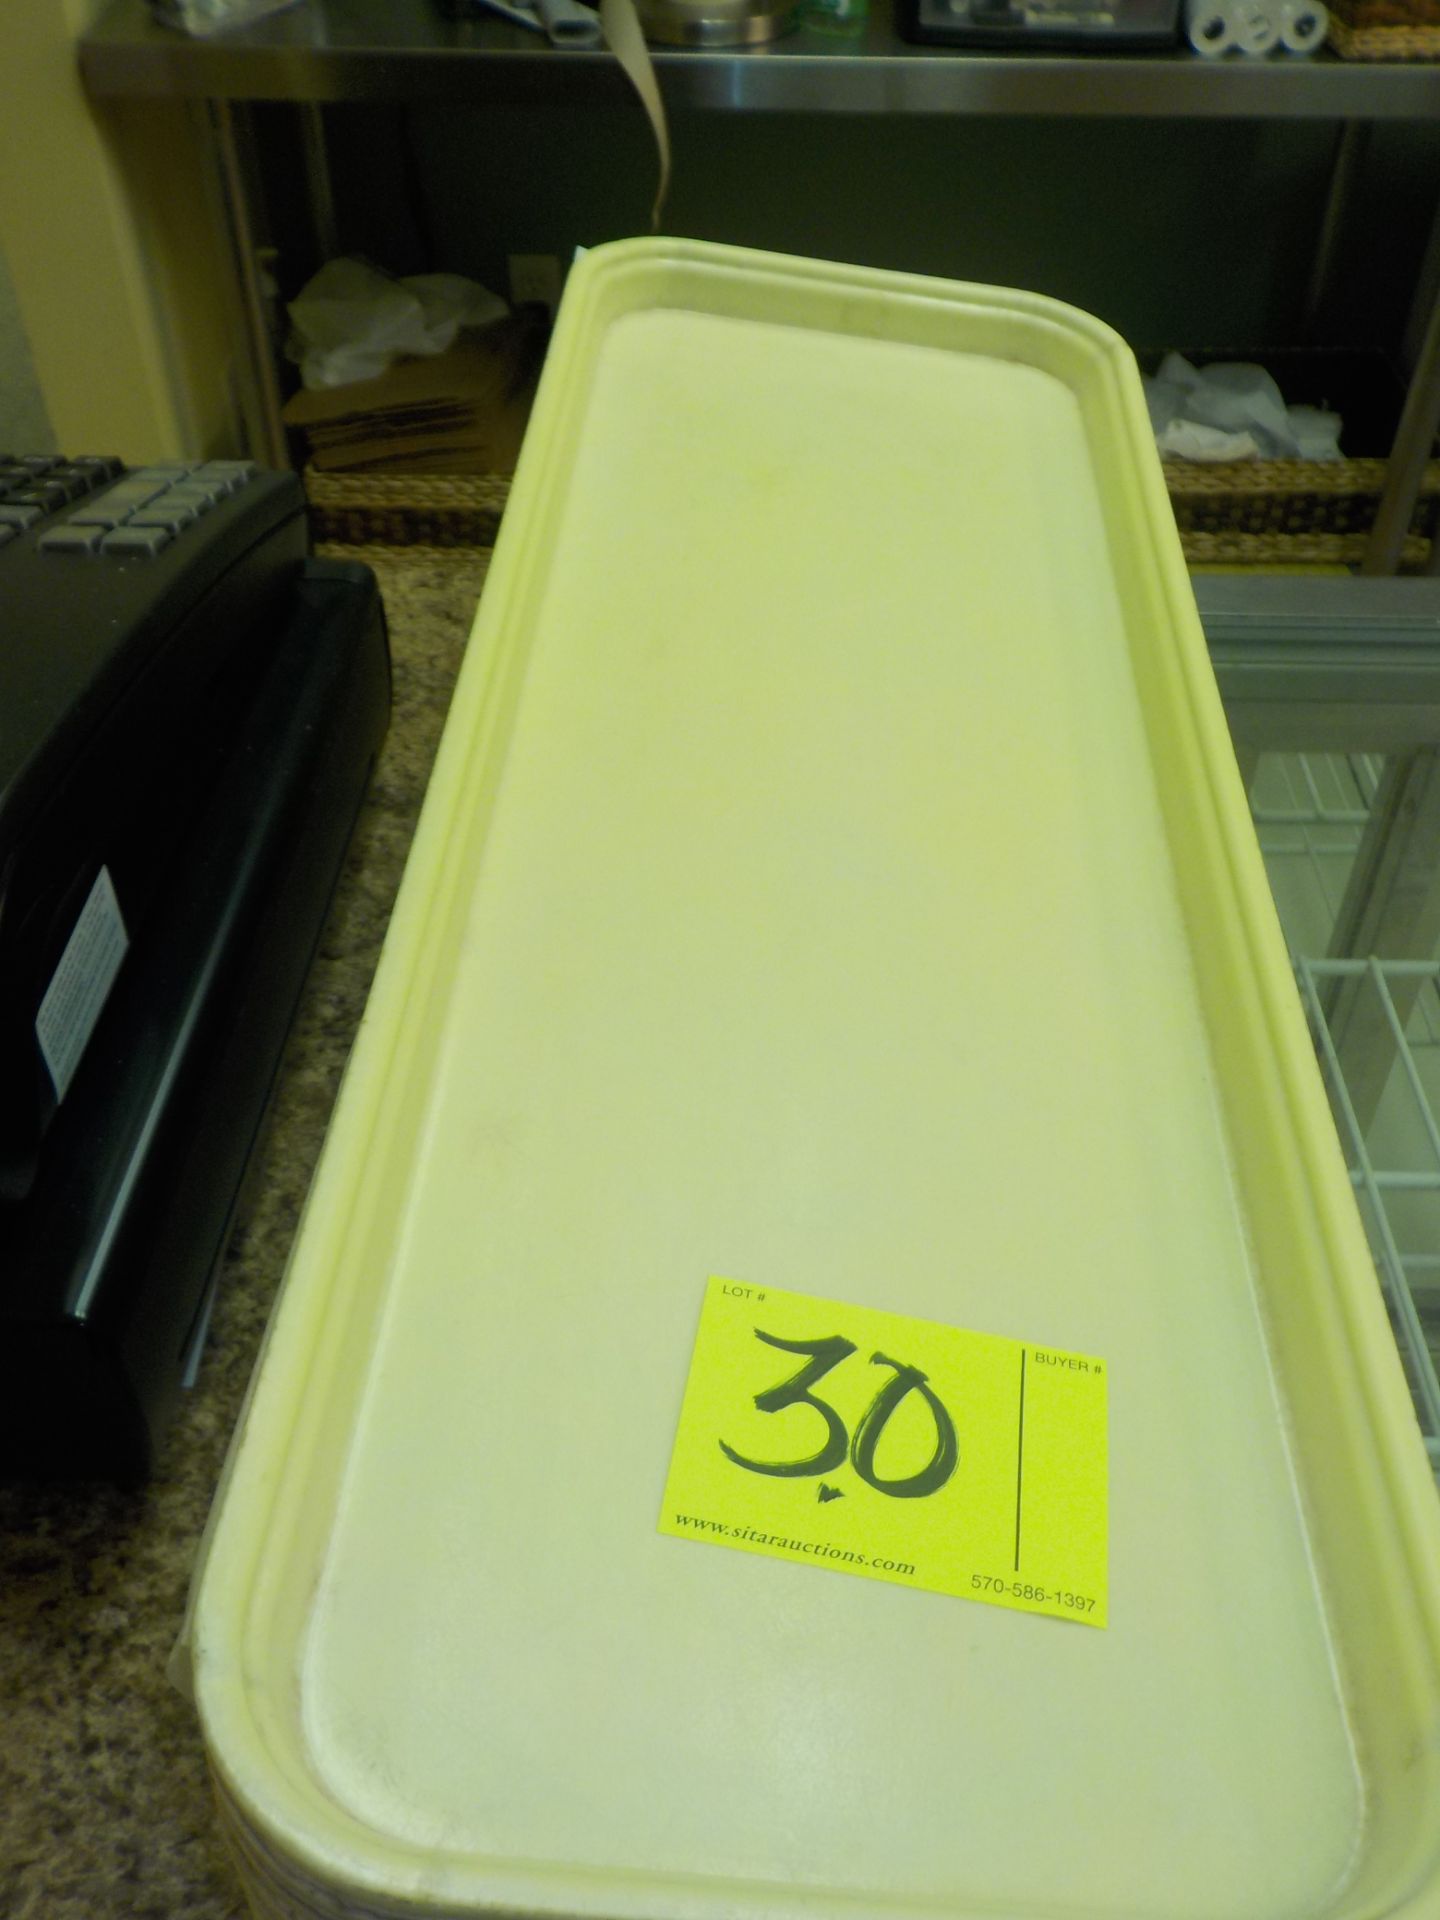 BAKERY DISPLAY TRAYS, 8 ¾” X 25 ½” (14), SOLD BY THE PIECE, BUY THEM ALL